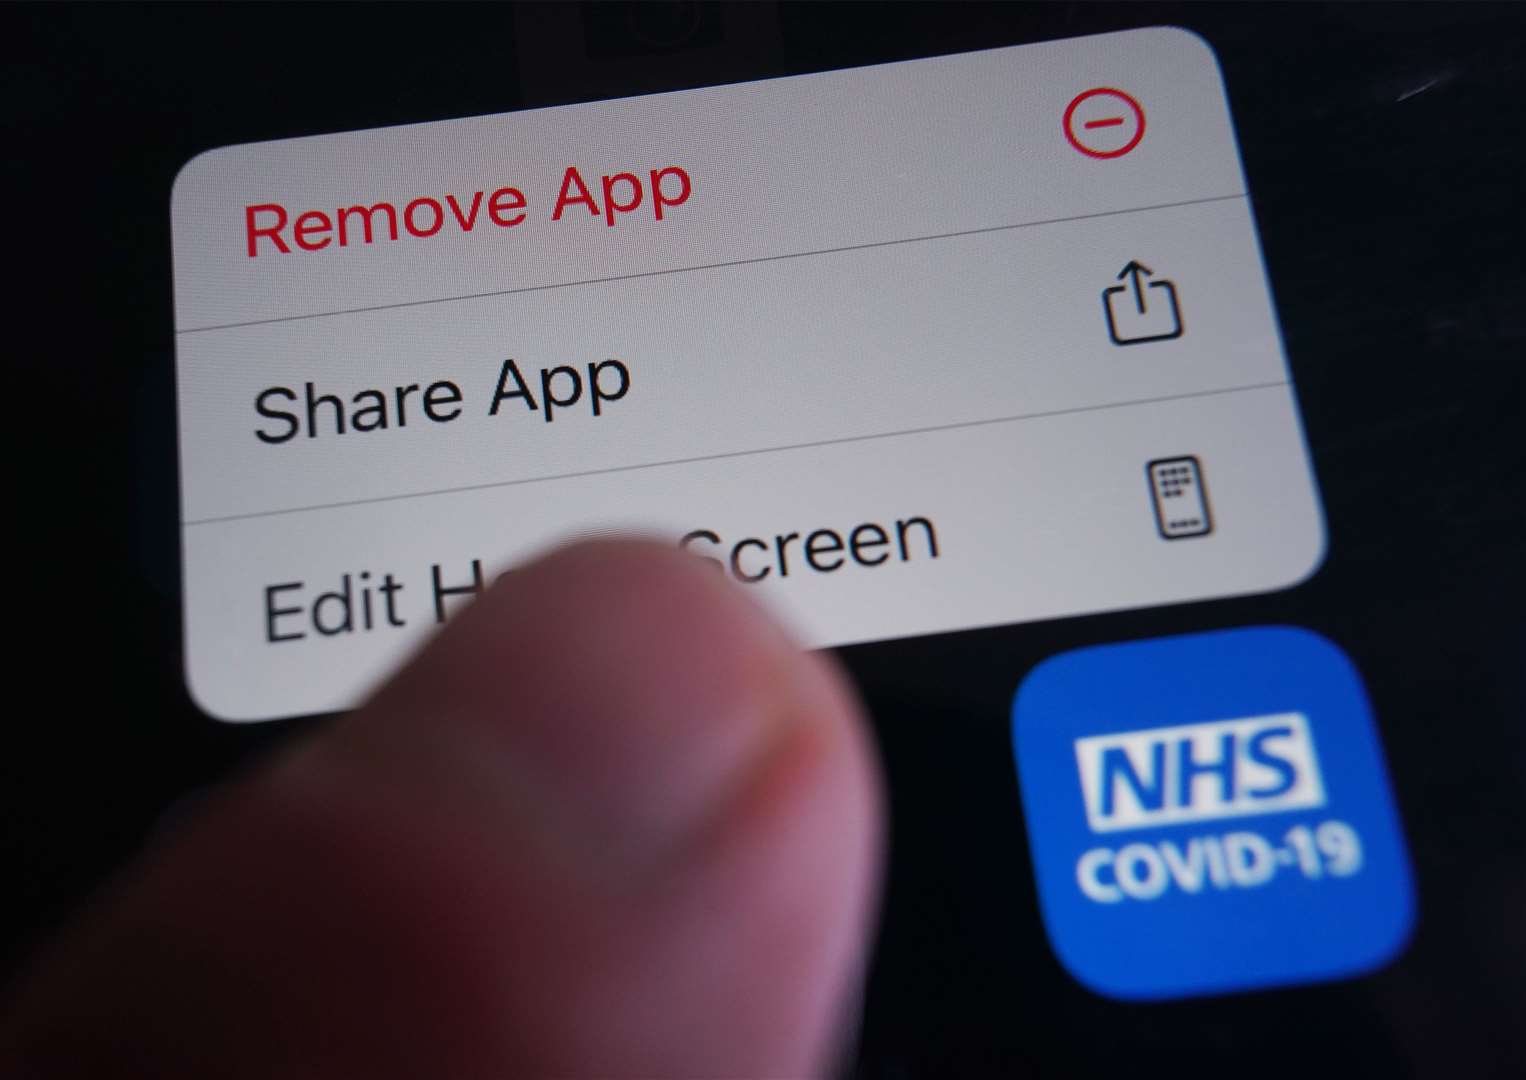 Dr Tom Dolphin said it was ‘very unfortunate’ that people are deleting the app (PA)